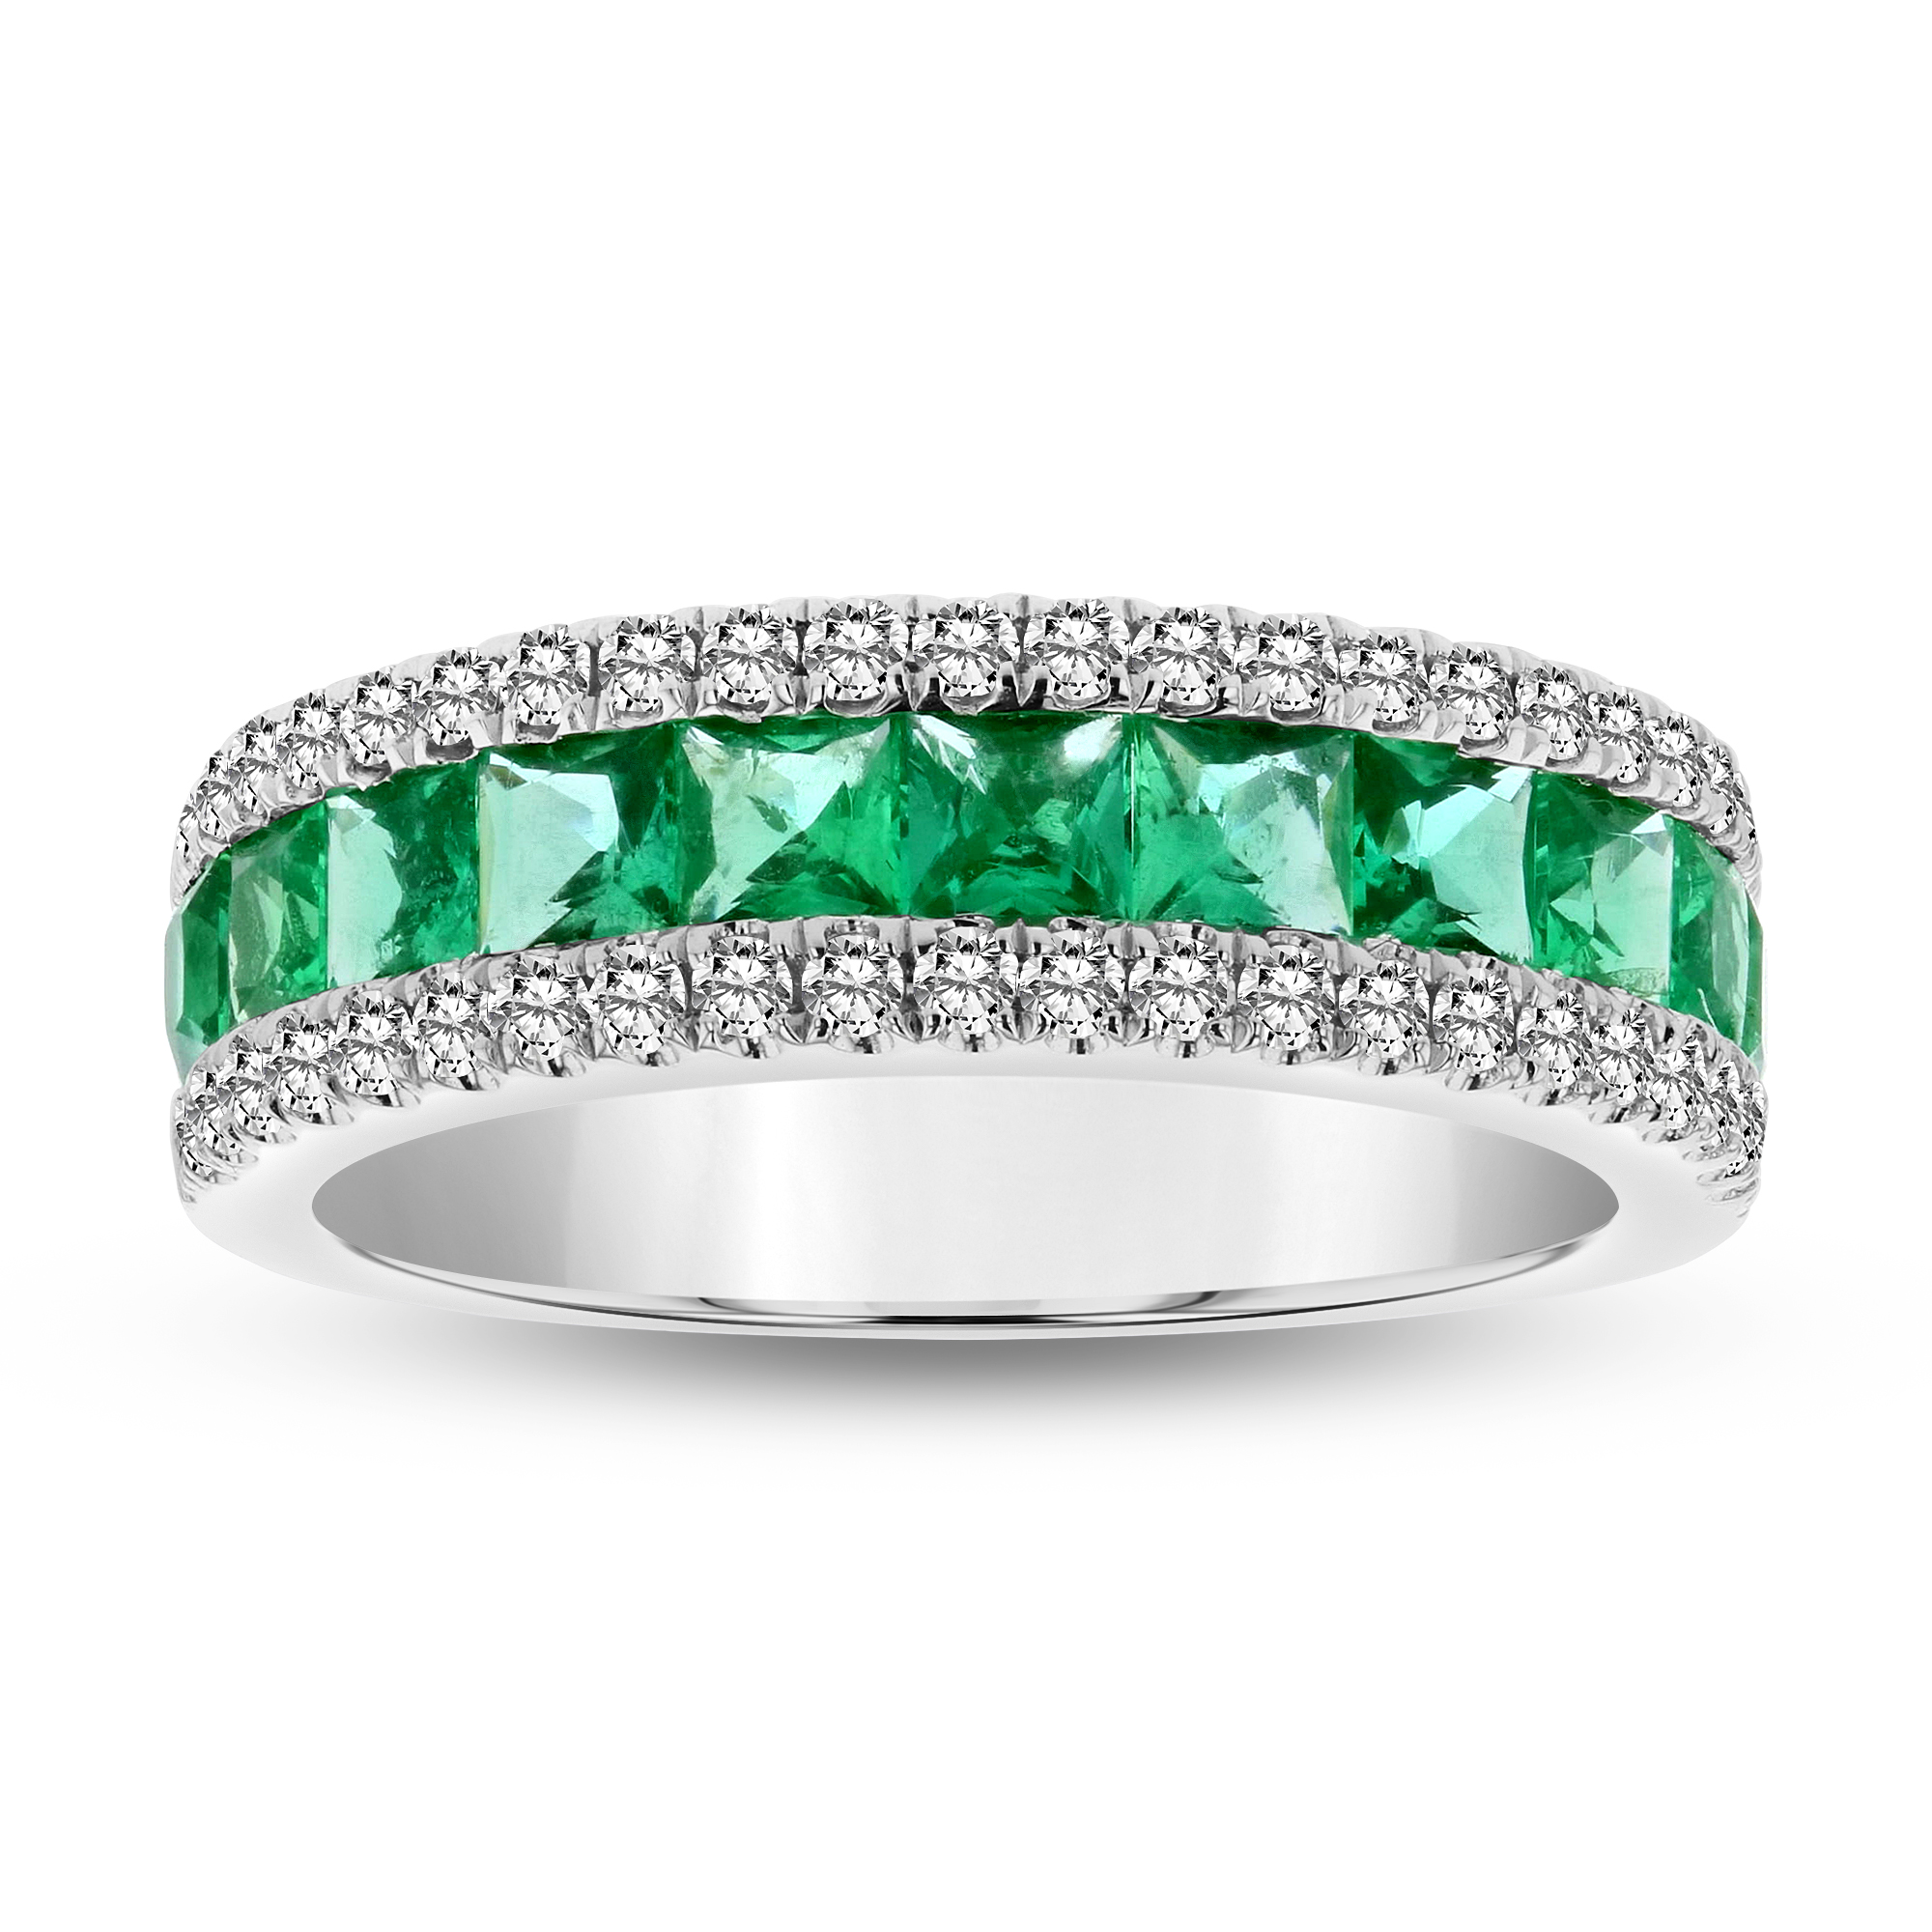 View 1.56ctw Diamond and Emerald Ring in 18k White Gold